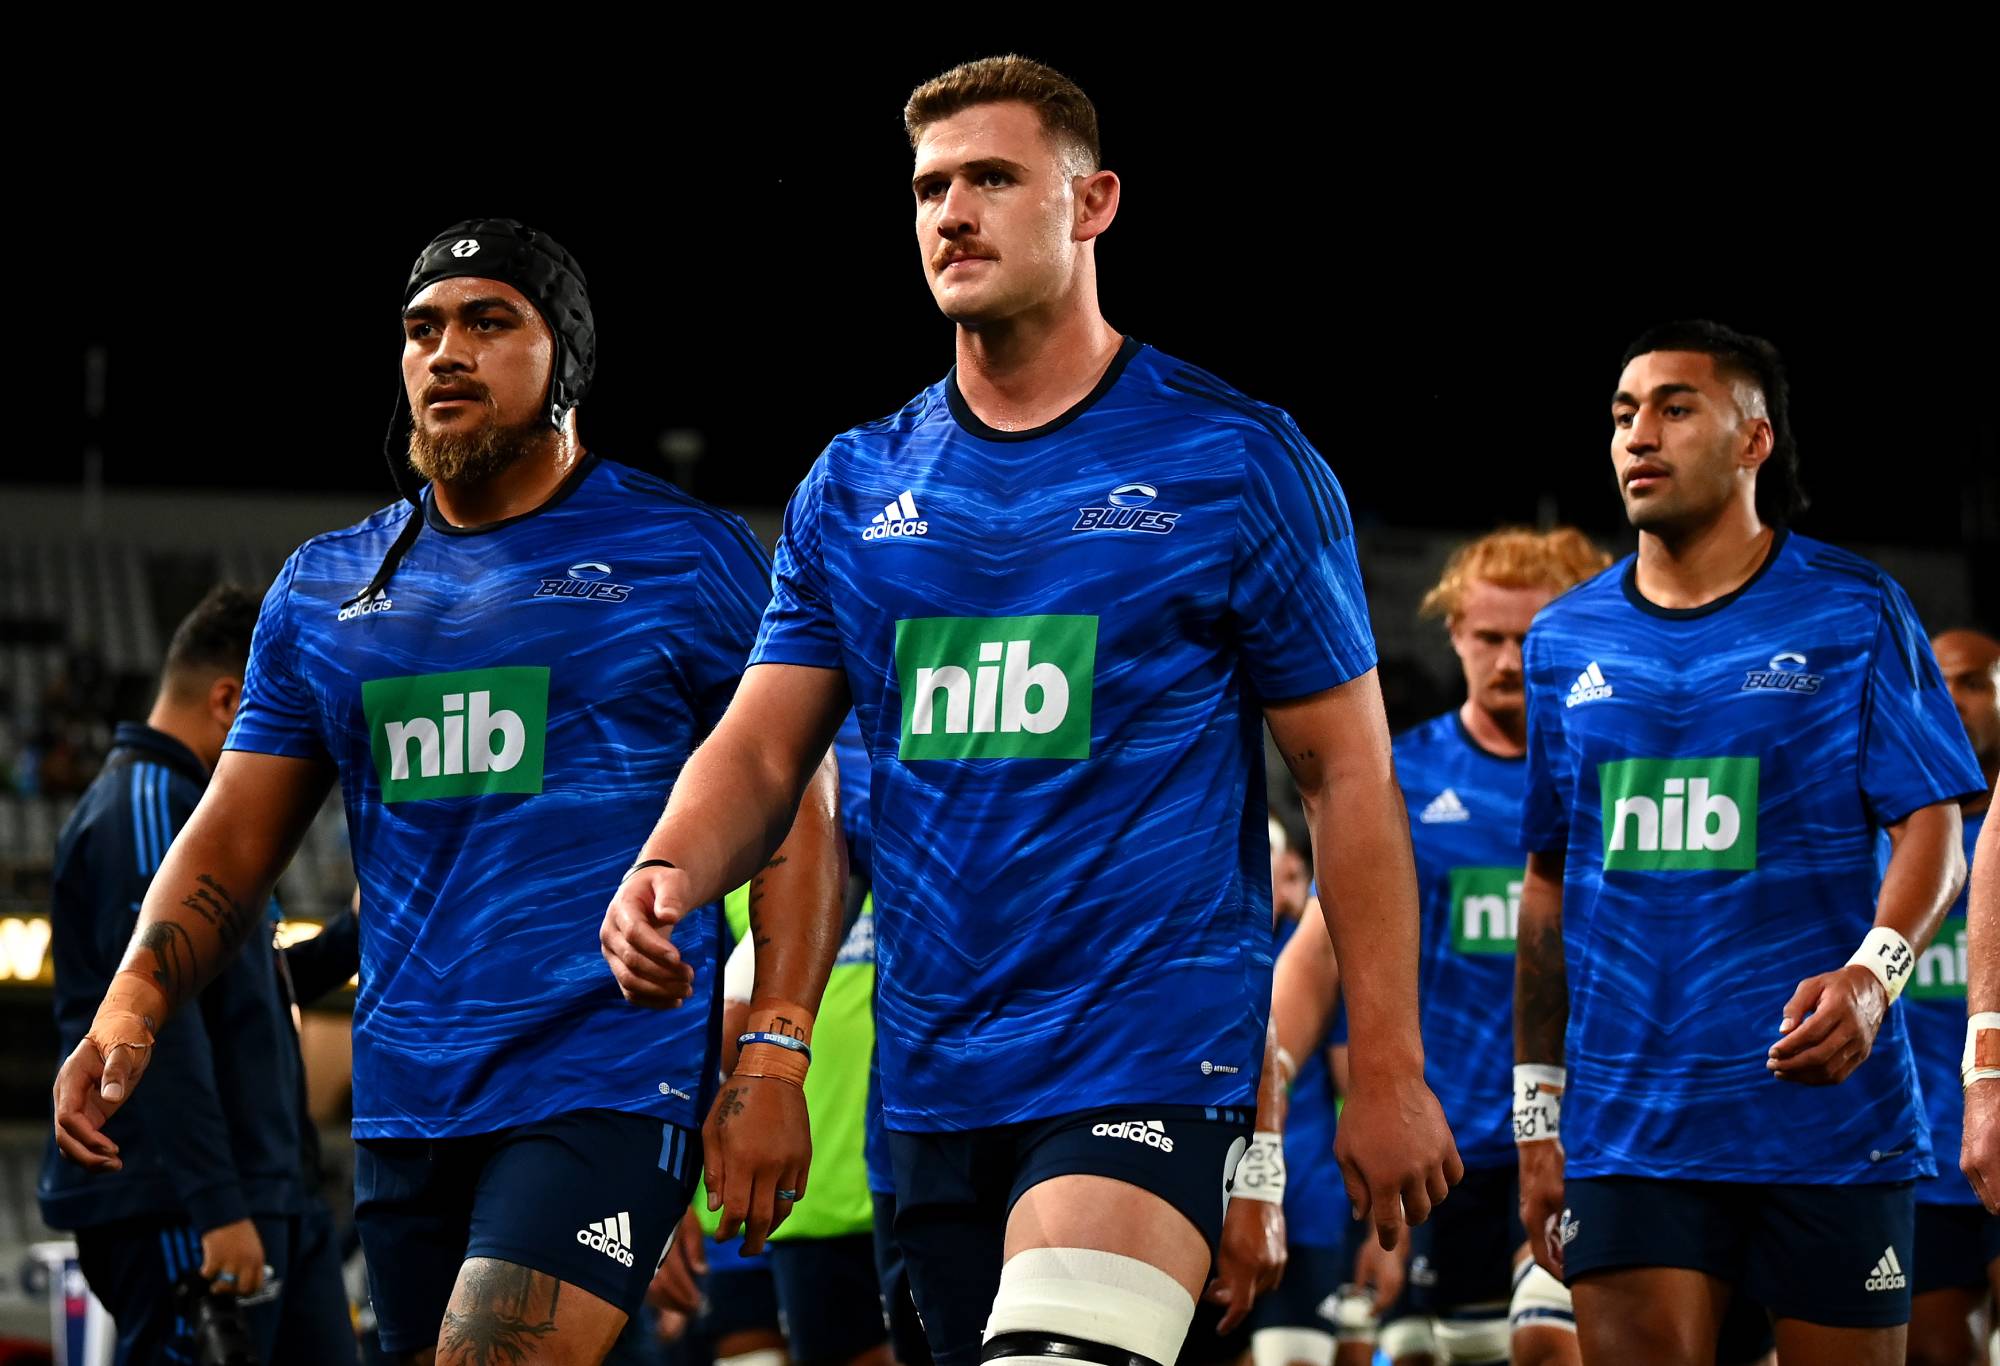 Dalton Papalii of the Blues leads his team off the field ahead of the round 13 Super Rugby Pacific match between the Blues and the Queensland Reds at Eden Park on May 14, 2022 in Auckland, New Zealand. (Photo by Hannah Peters/Getty Images)